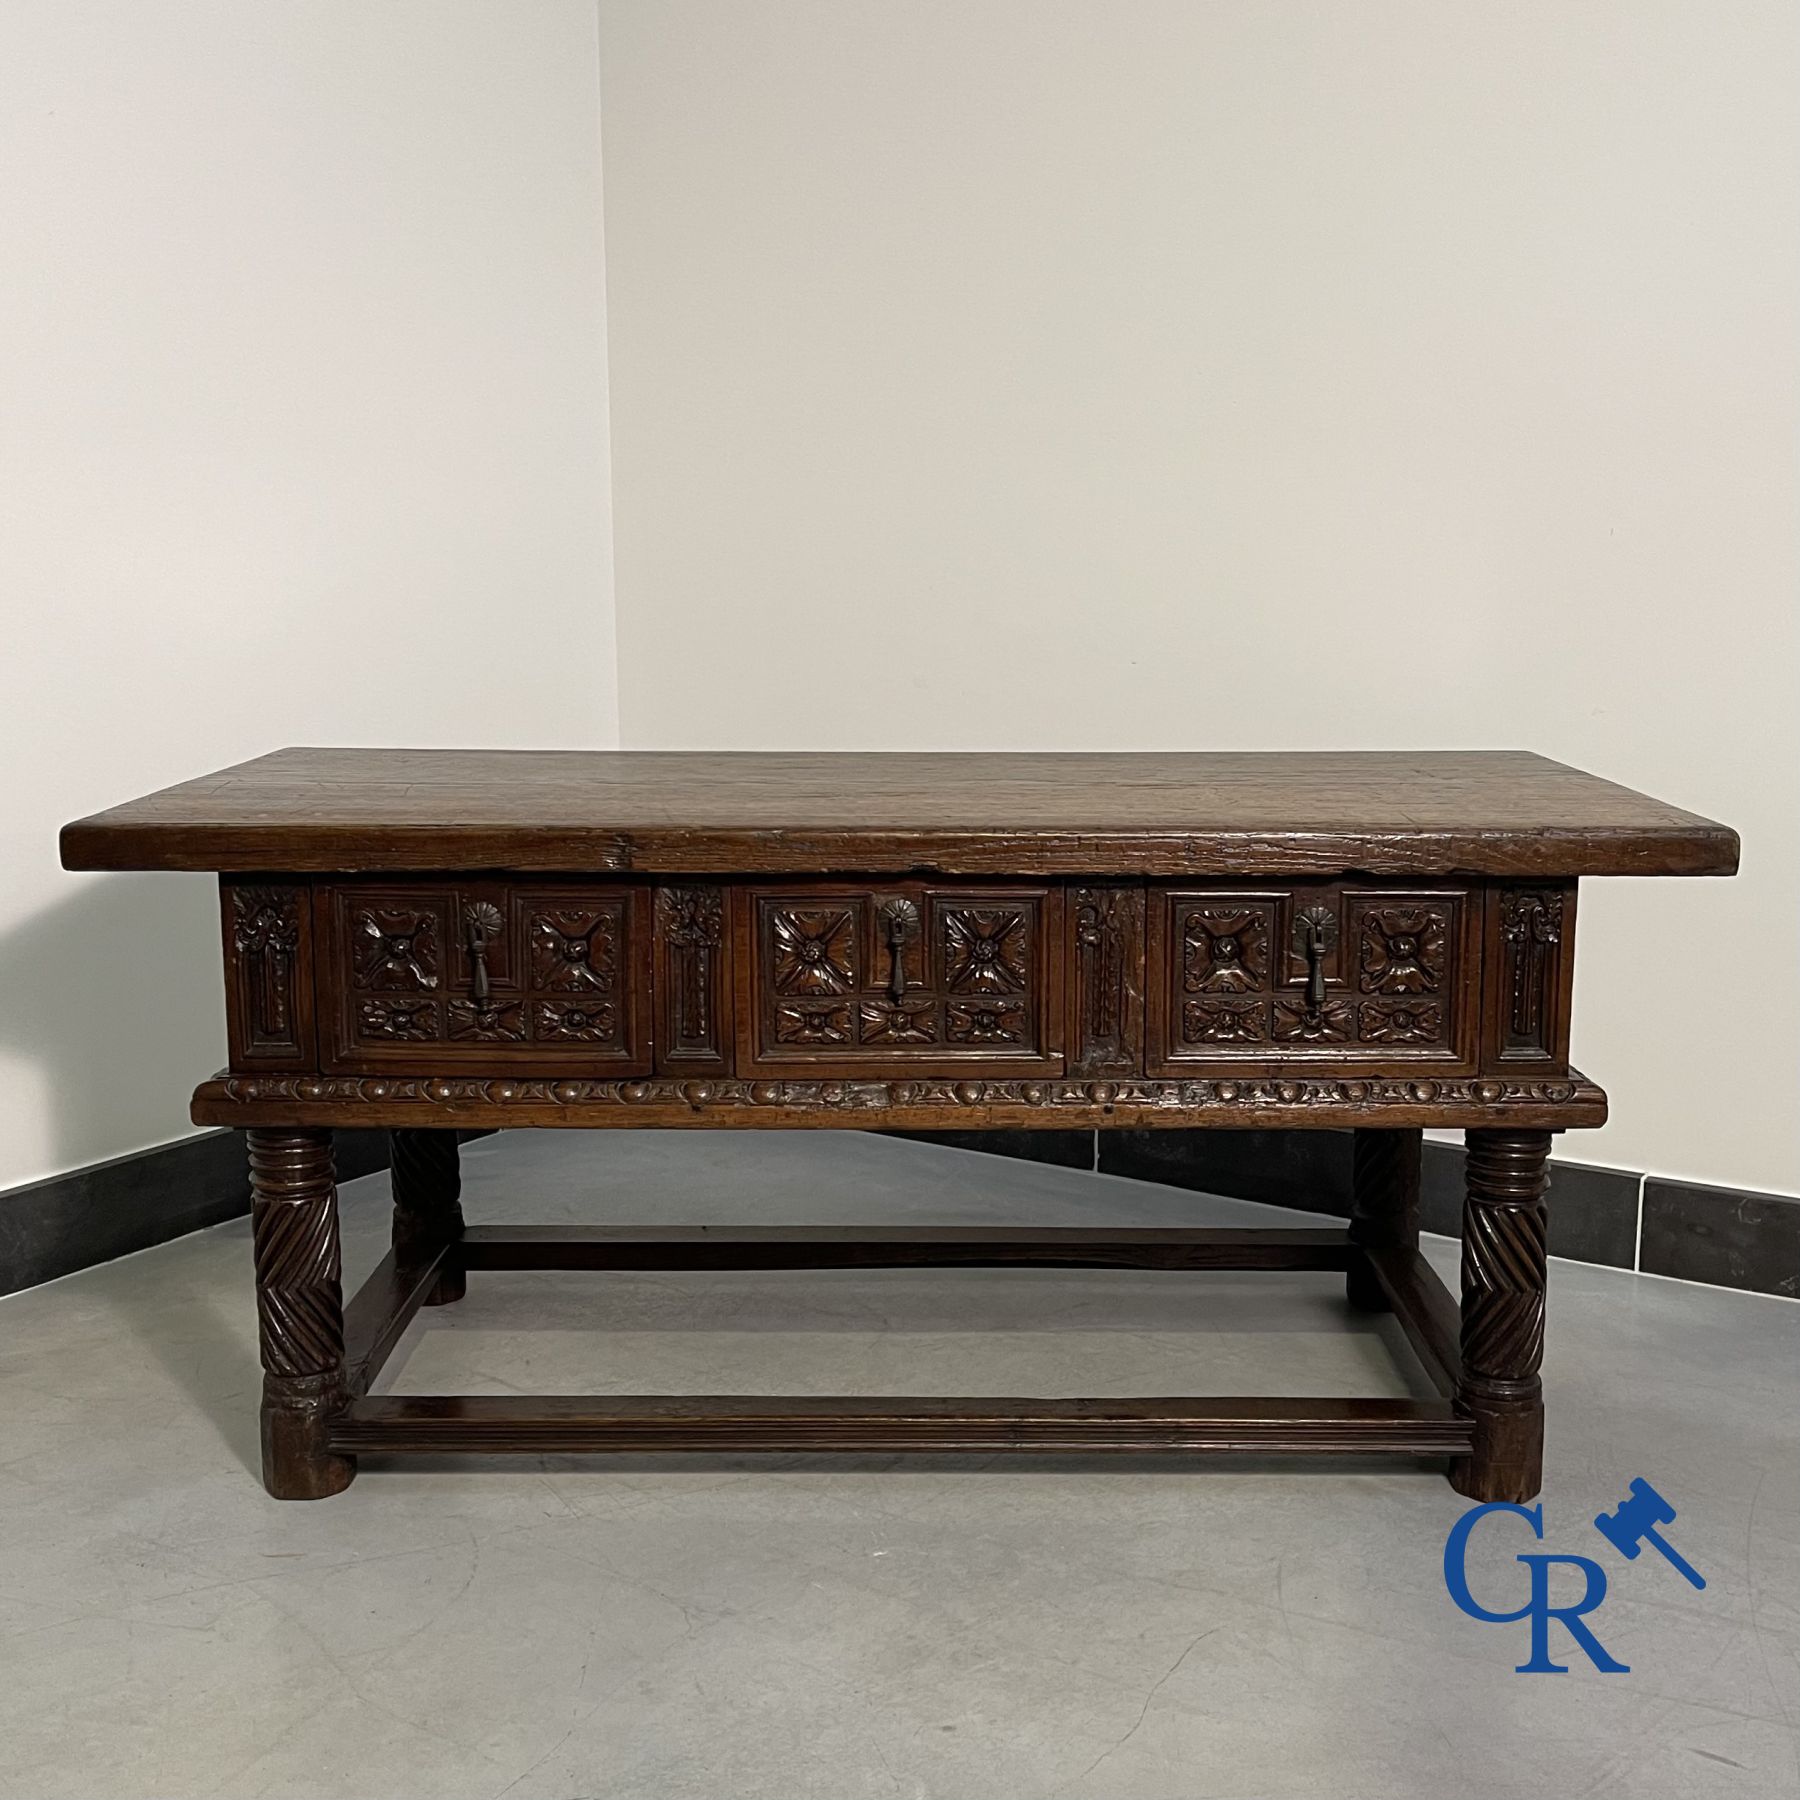 Furniture: 17th century carved walnut table with 3 drawers.